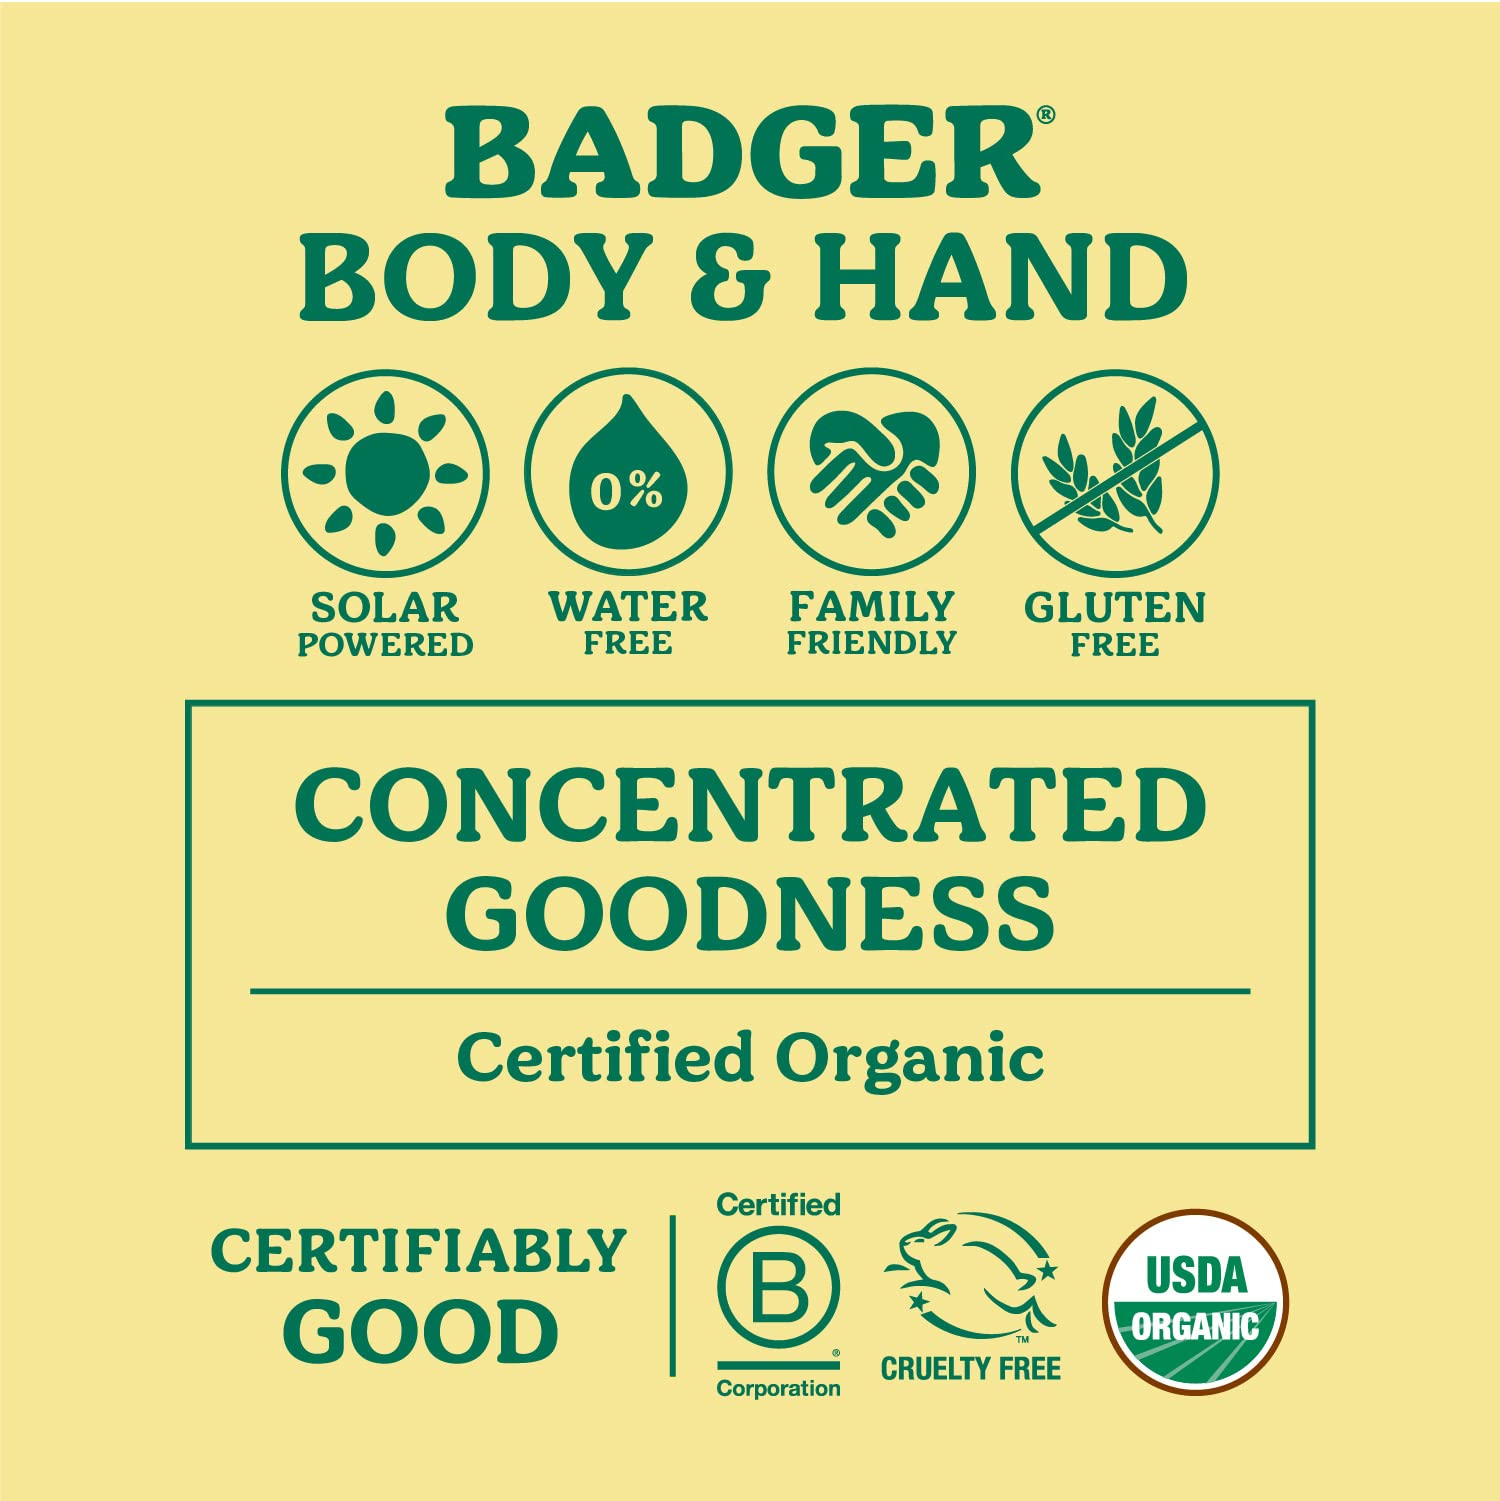 Badger - Foot Balm, Peppermint & Tea Tree, Heel Balm for Dry Cracked Feet, Certified Organic, Foot Balm with Essential Oils, Extra Virgin Olive and Jojoba Oils, 0.75 oz